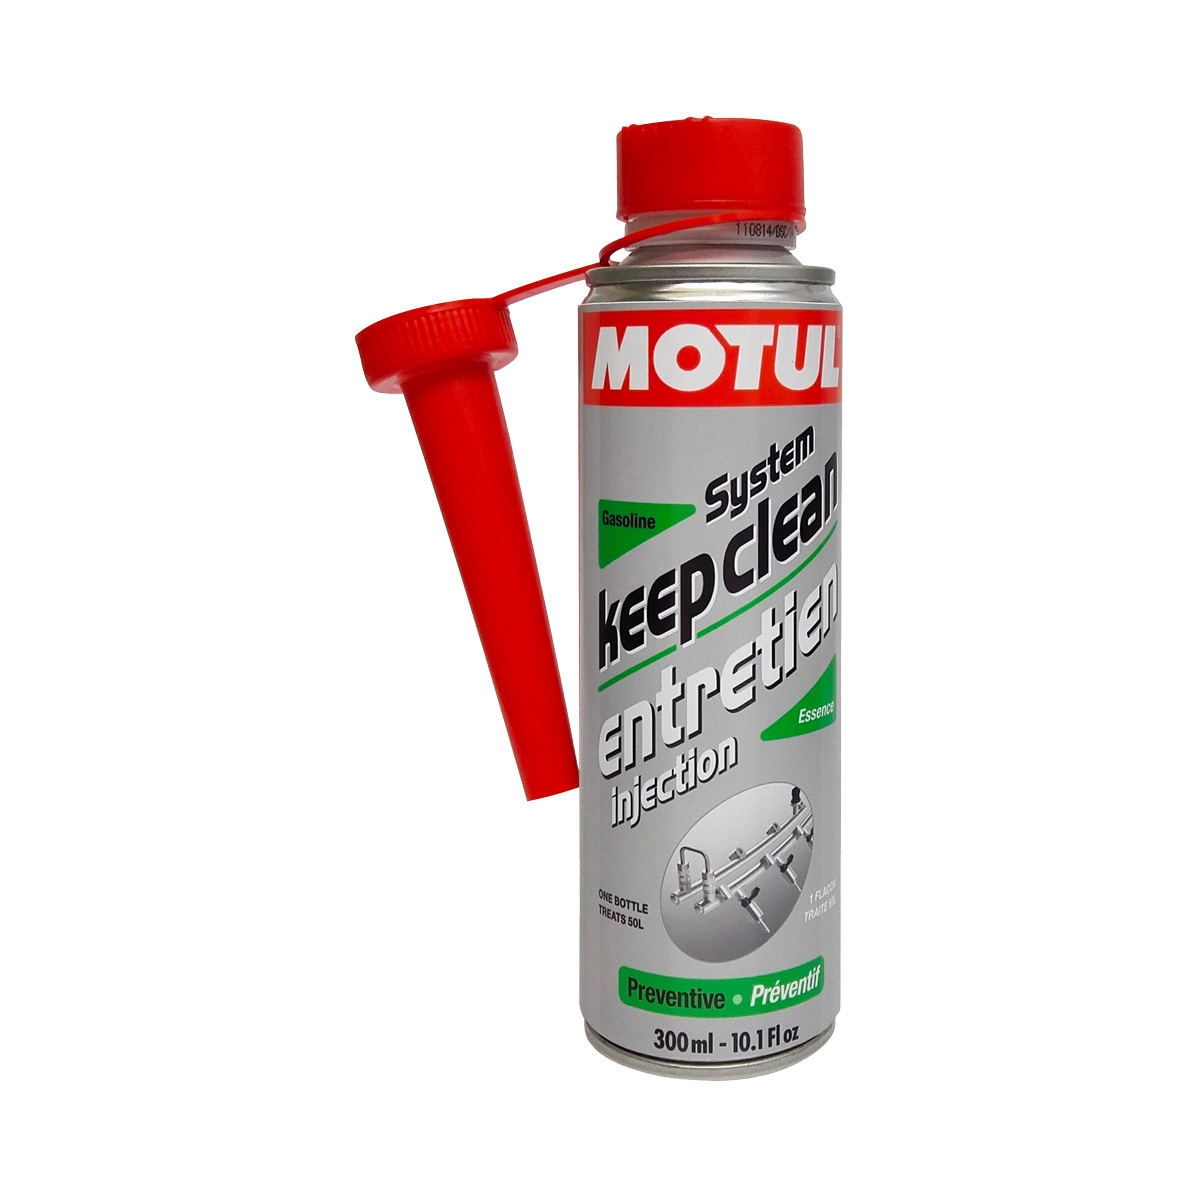 Motul Fuel System Clean Petrol Injector Cleaner (300 mL)